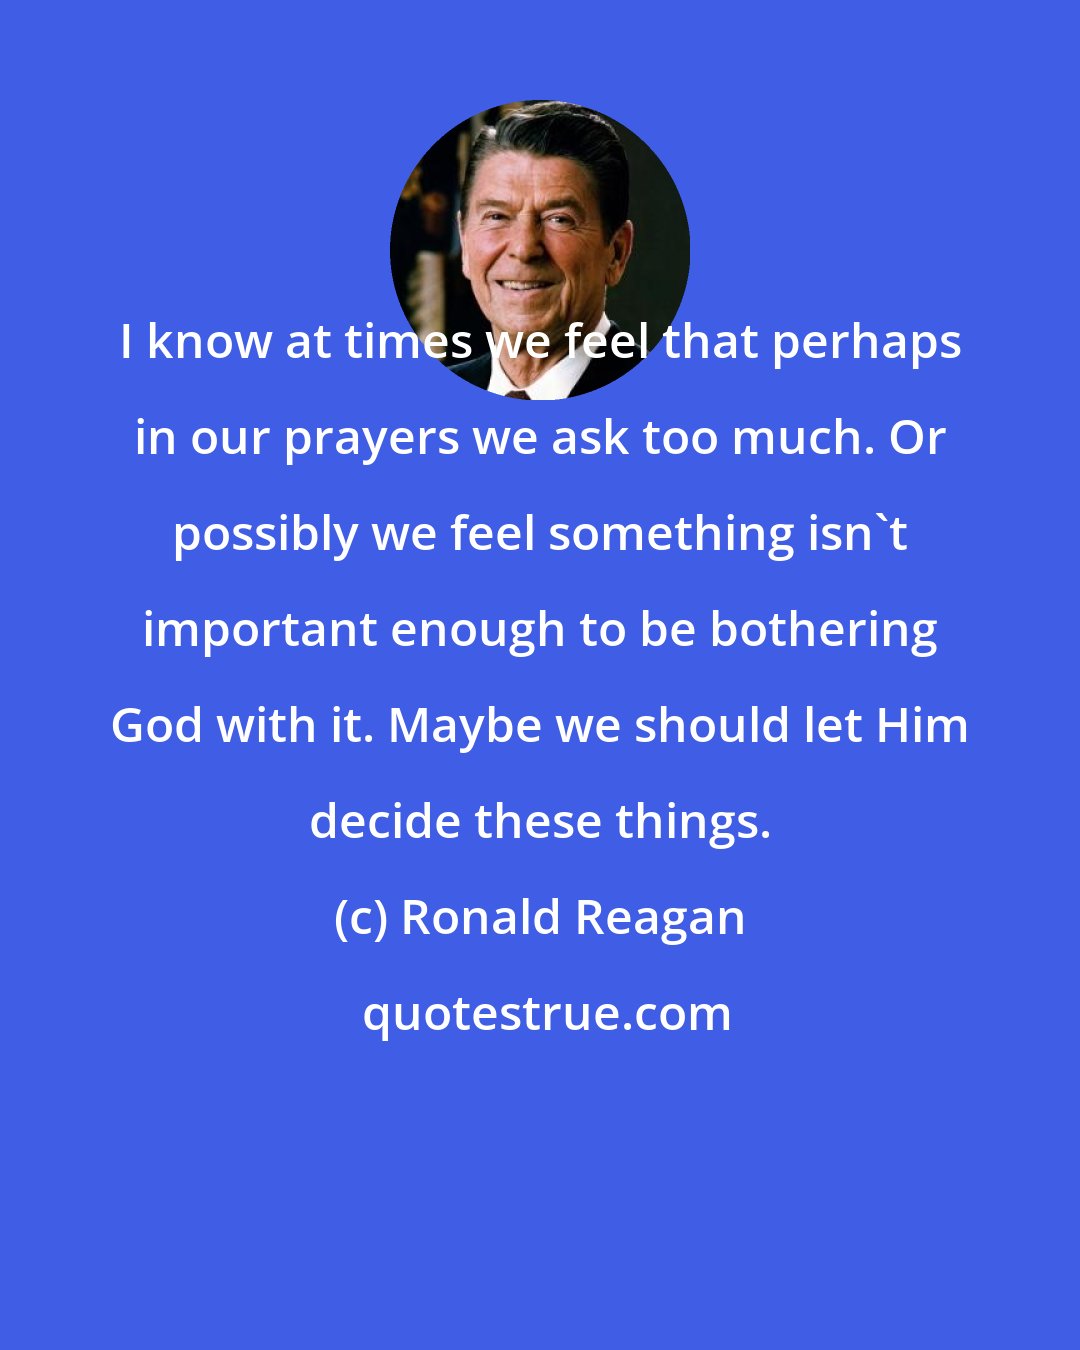 Ronald Reagan: I know at times we feel that perhaps in our prayers we ask too much. Or possibly we feel something isn't important enough to be bothering God with it. Maybe we should let Him decide these things.